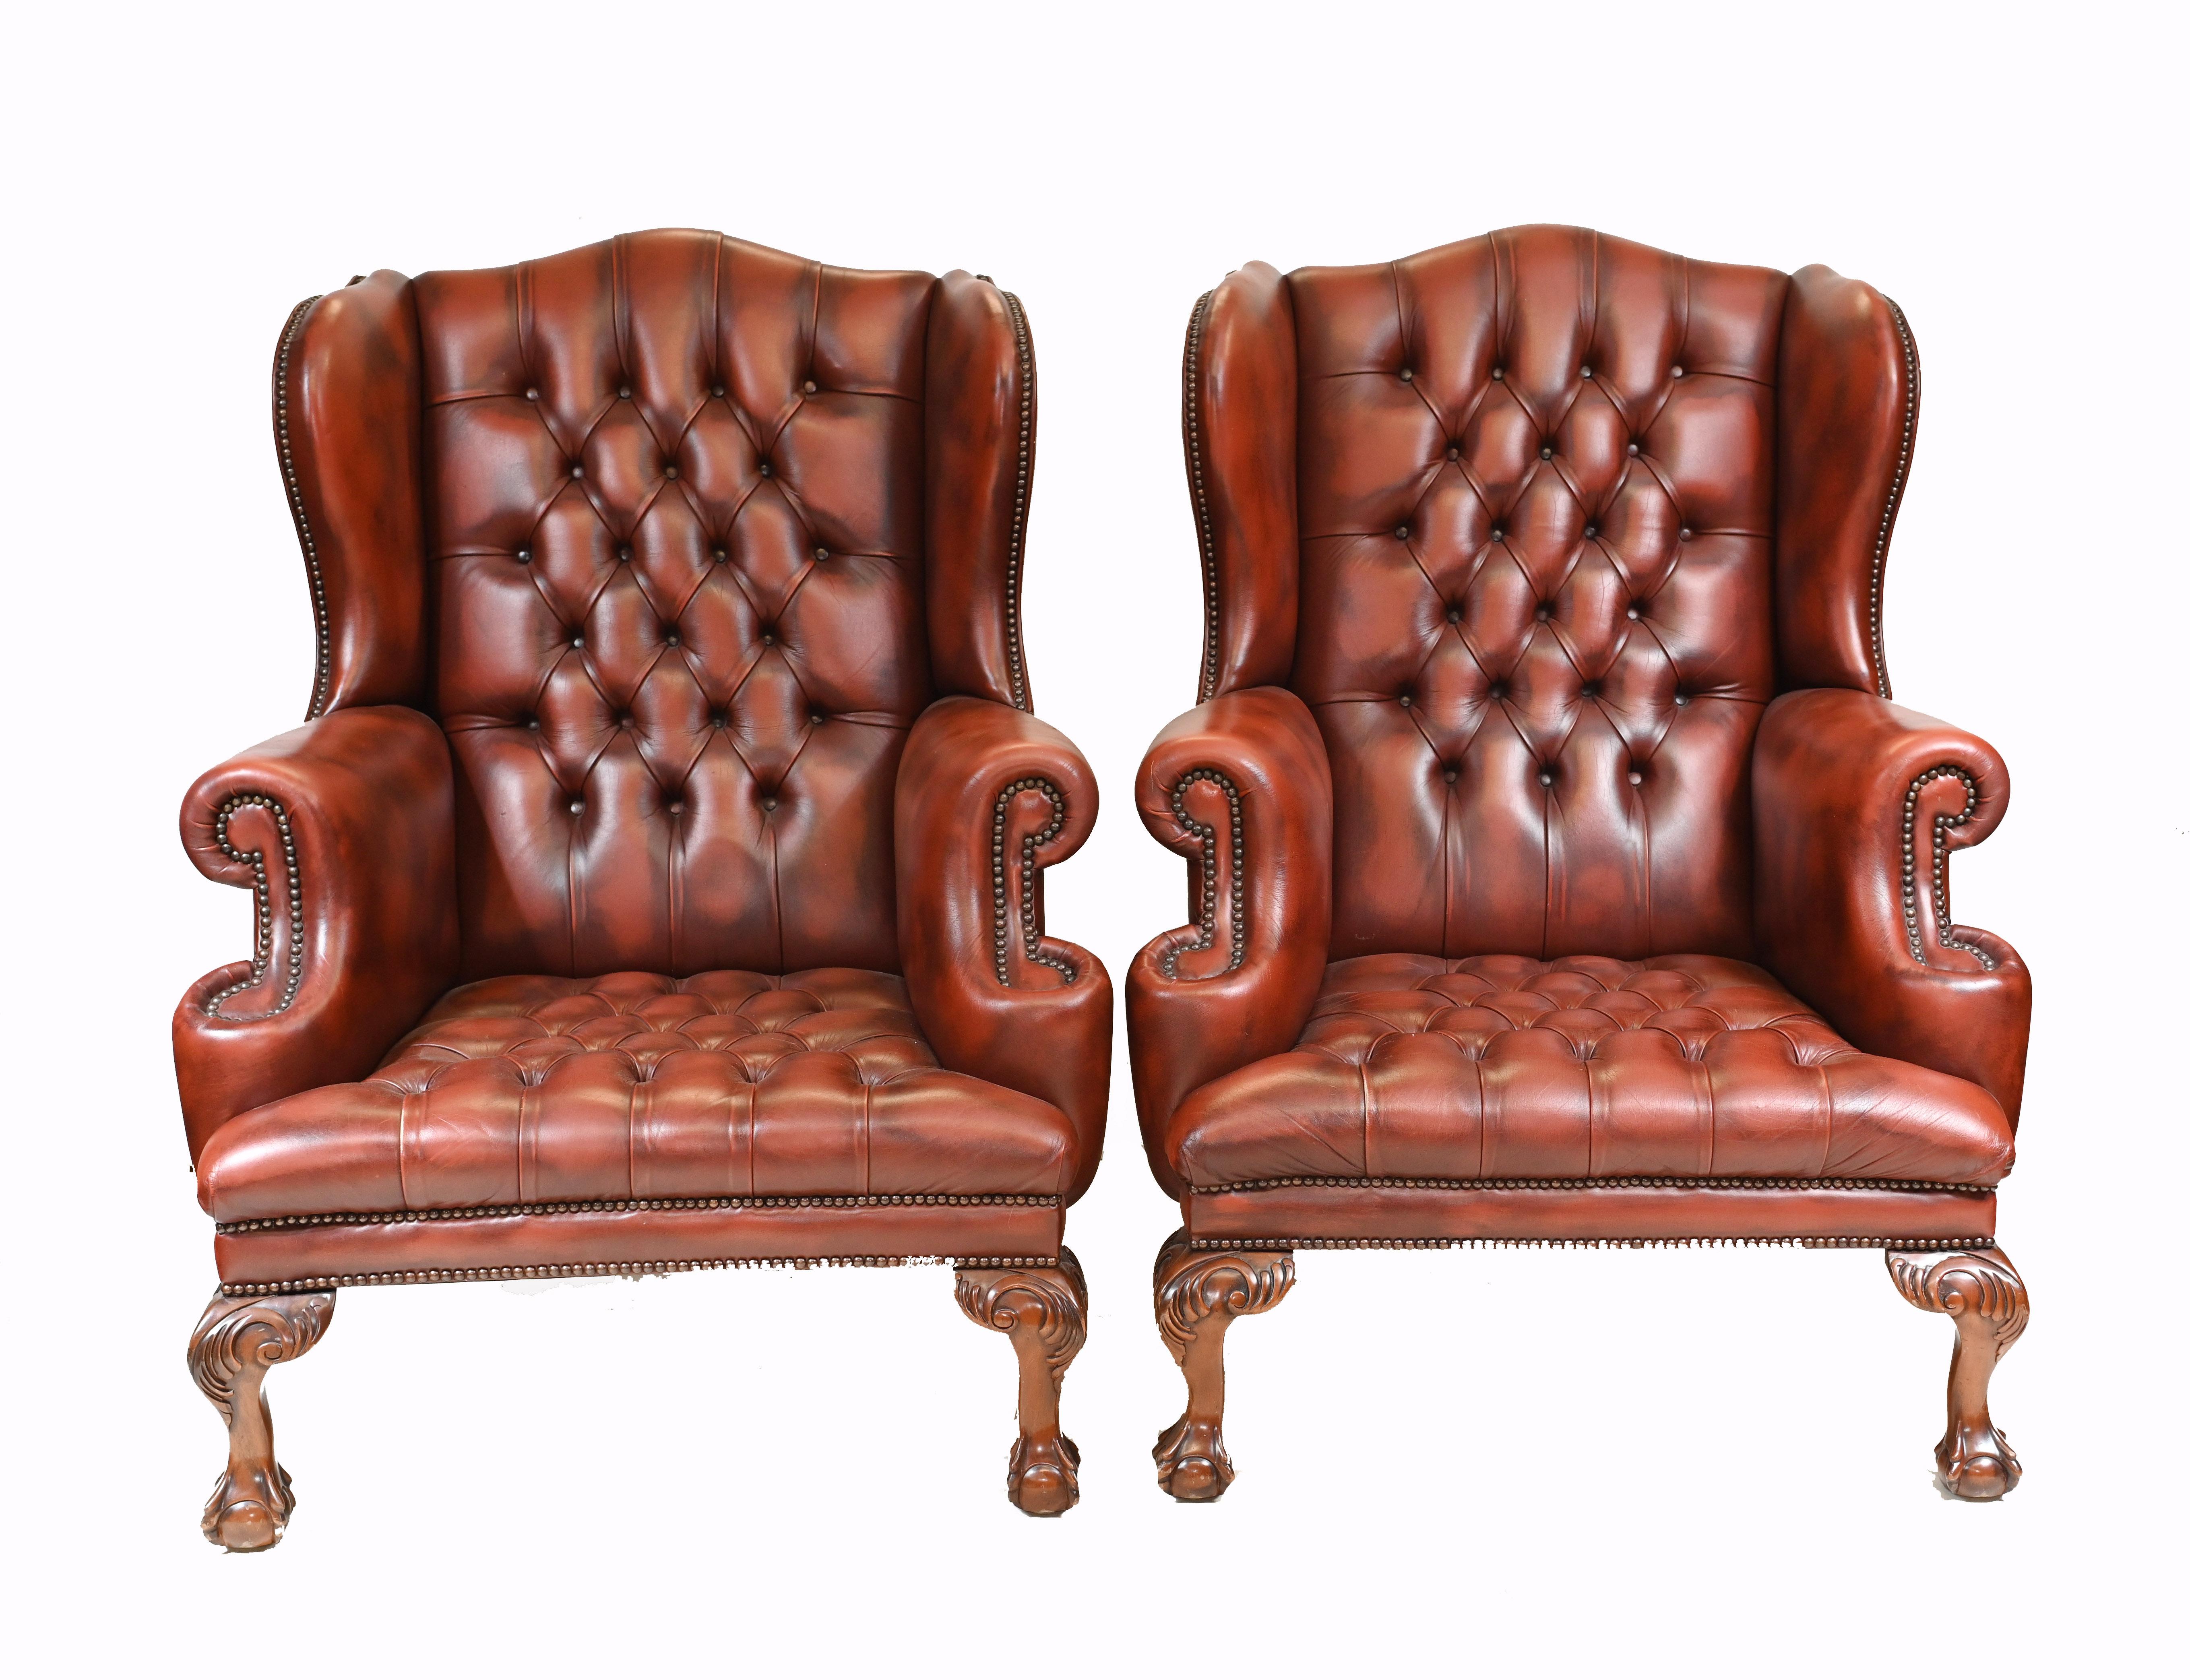 Gorgeous pair of Chesterfield leather wing back chairs
Classic English library meets gentleman's club look.
Very comfortable, you can really slide back into these chairs.
Leather finish with deep button look.
Date this pair to circa